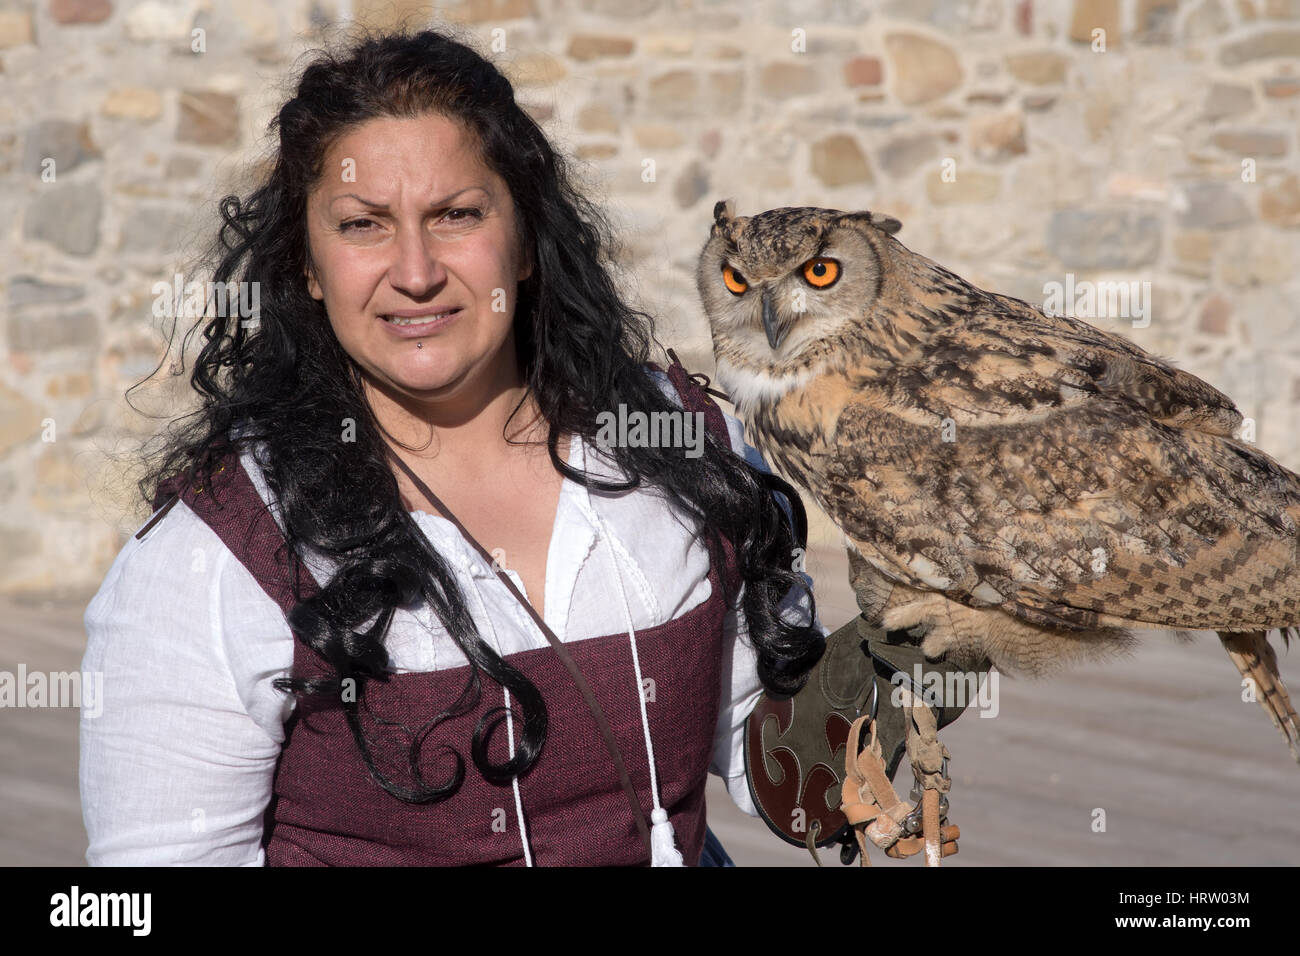 Falconry display at the medieval festival with various birds of prey in the historic city of Taggia in Liguria region of Italy Stock Photo